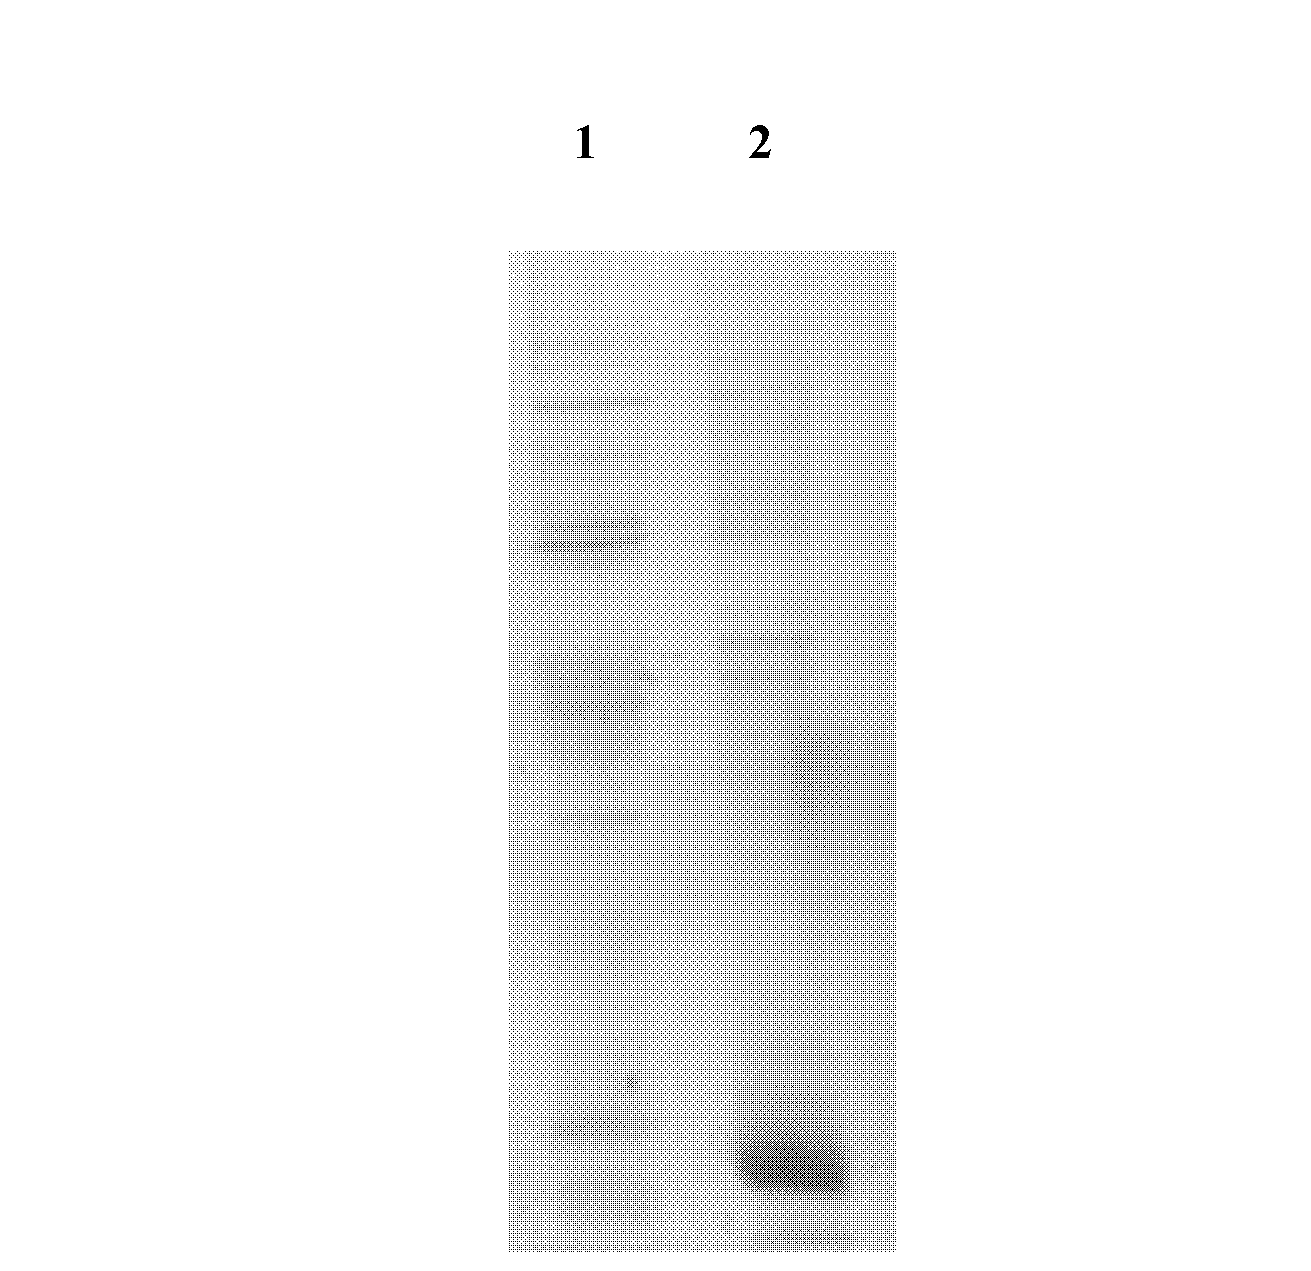 Method for preparing recombinant human IgE receptor protein and application of recombinant human IgE receptor protein